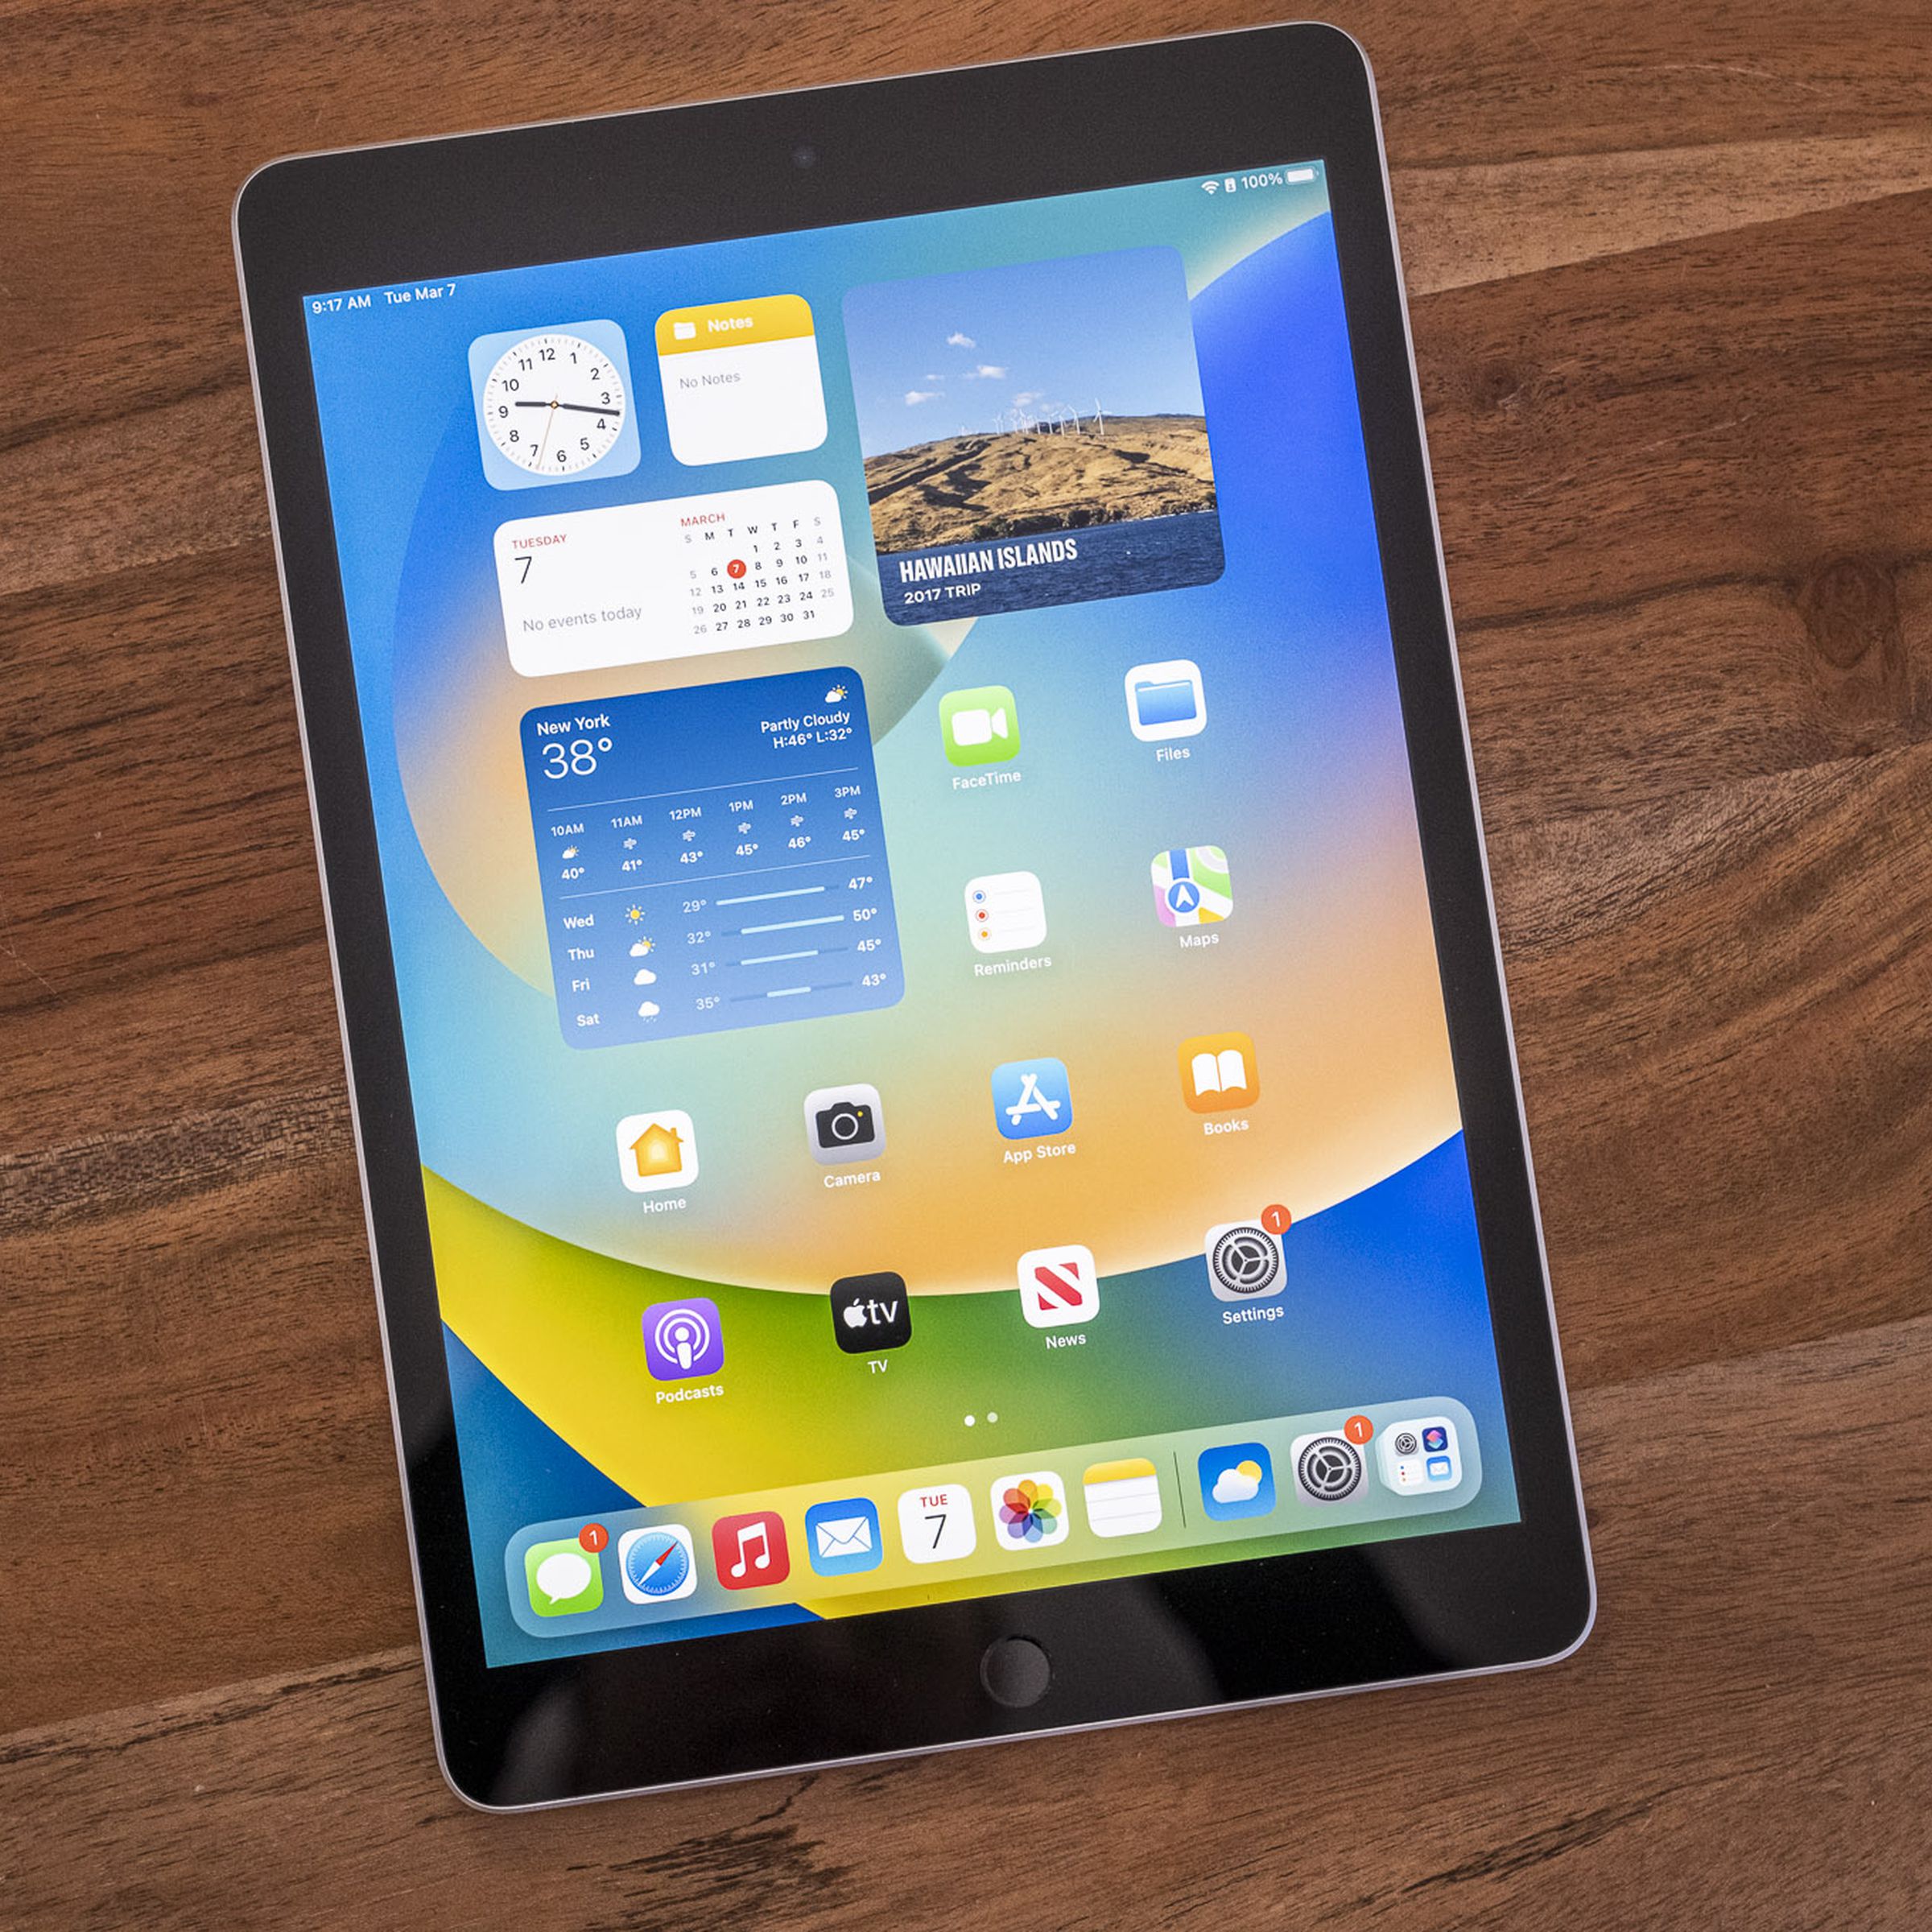 Apple’s ninth-gen iPad on a wooden table, viewed from the top down